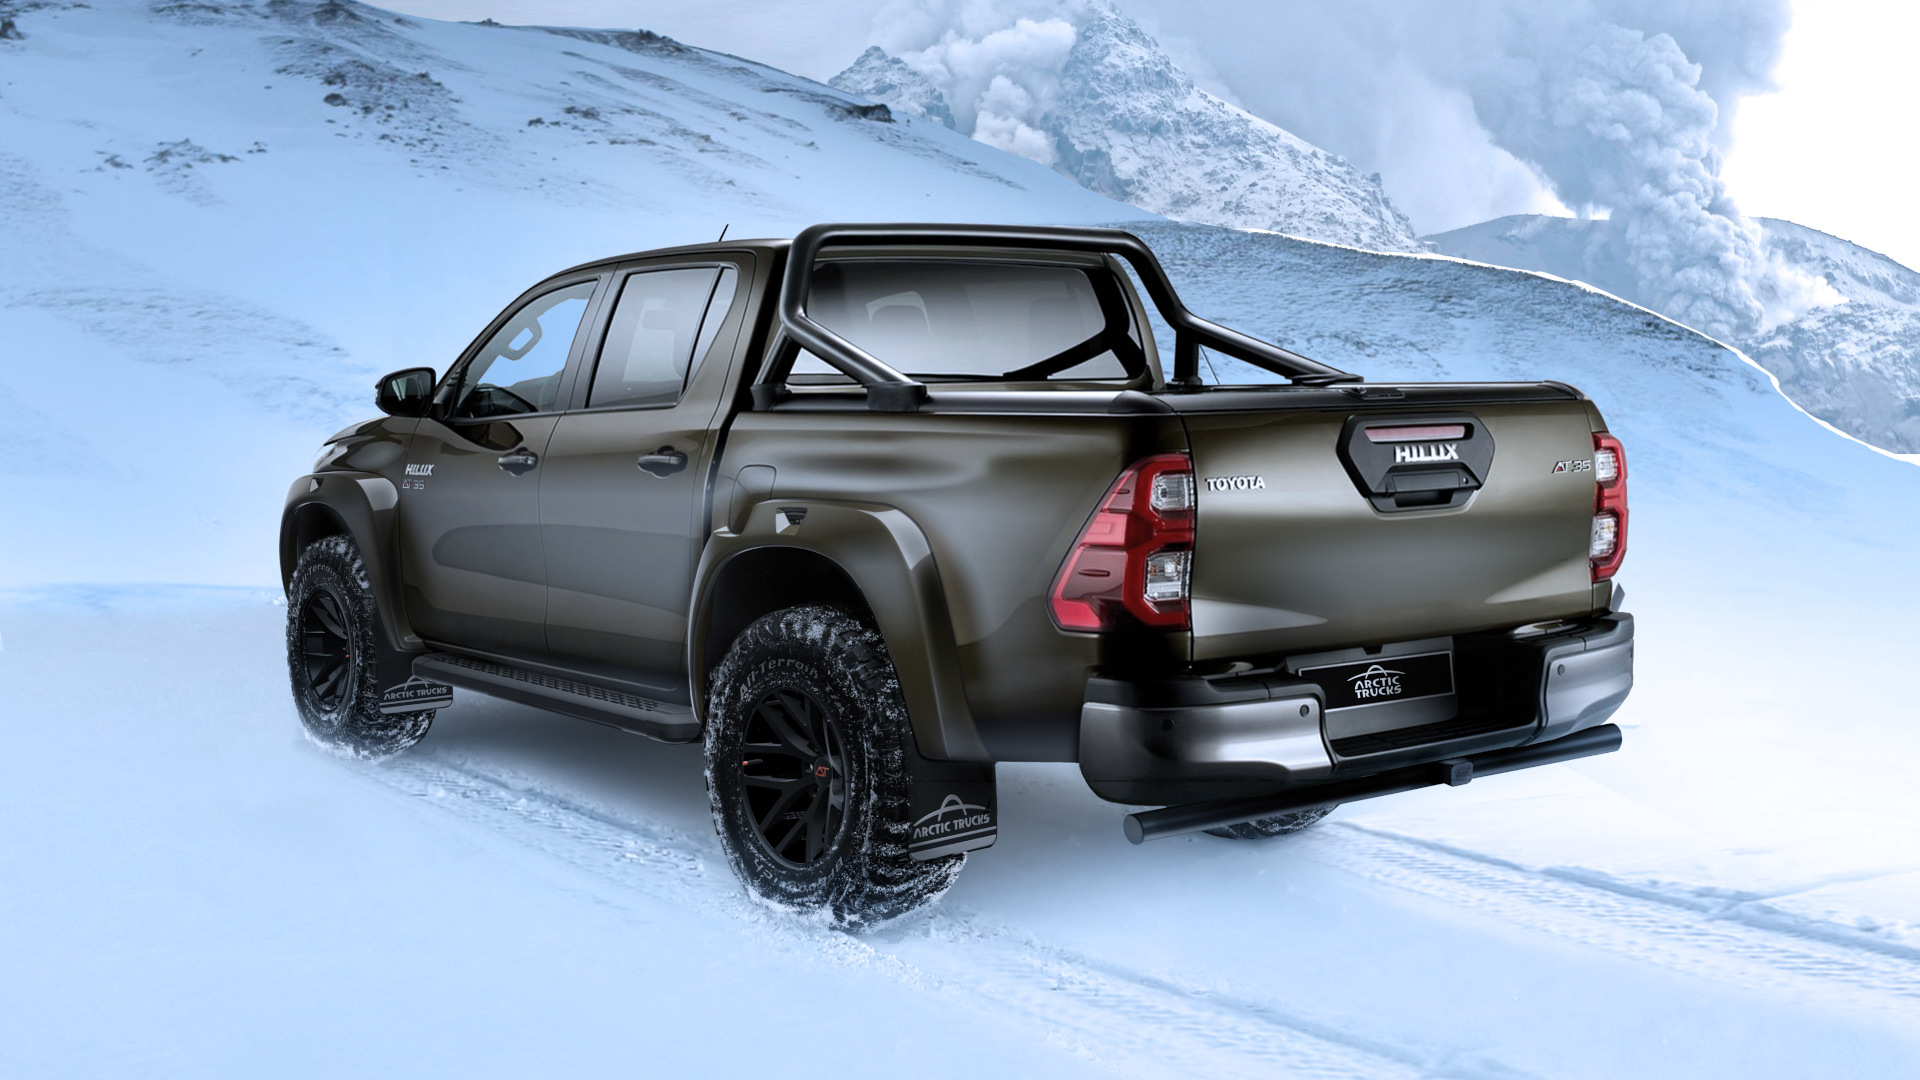 The modified Toyota Hilux AT 35 by Arctic Trucks, angled rear view